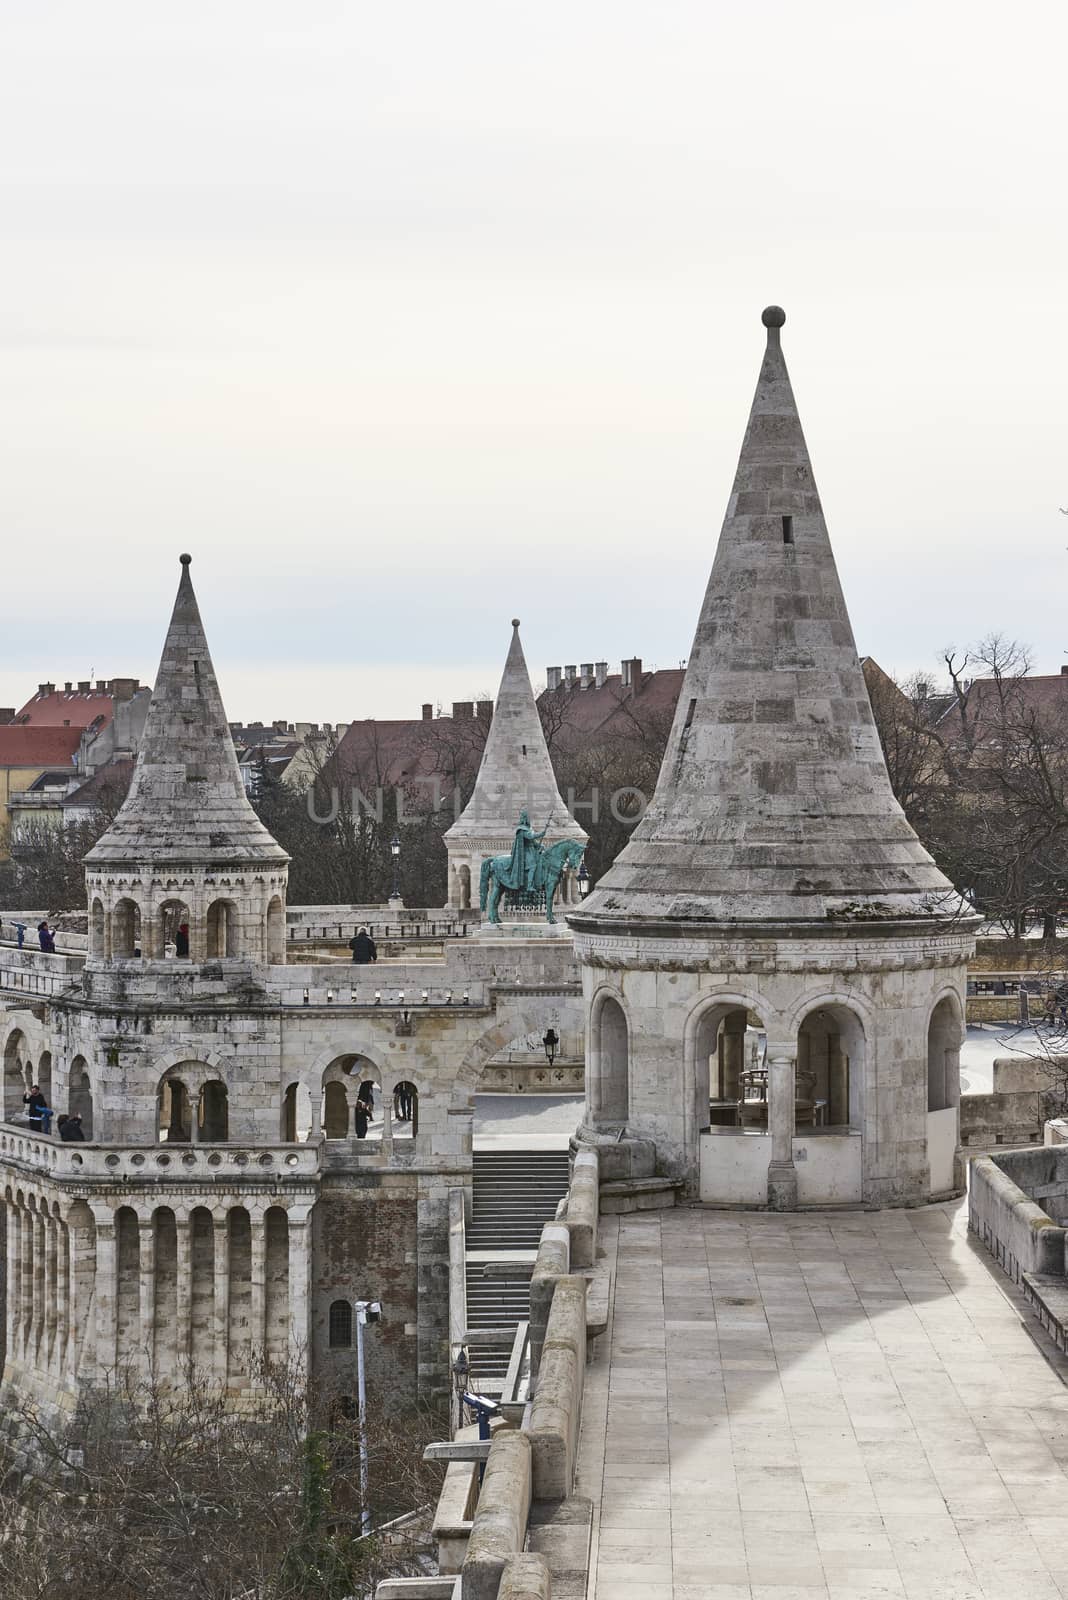 BUDAPEST, HUNGARY - FEBRUARY 02: Cropped shot of Fisherman's Bastion's spires, with statue of Saint Stephen in the background. February 02, 2016 in Budapest.